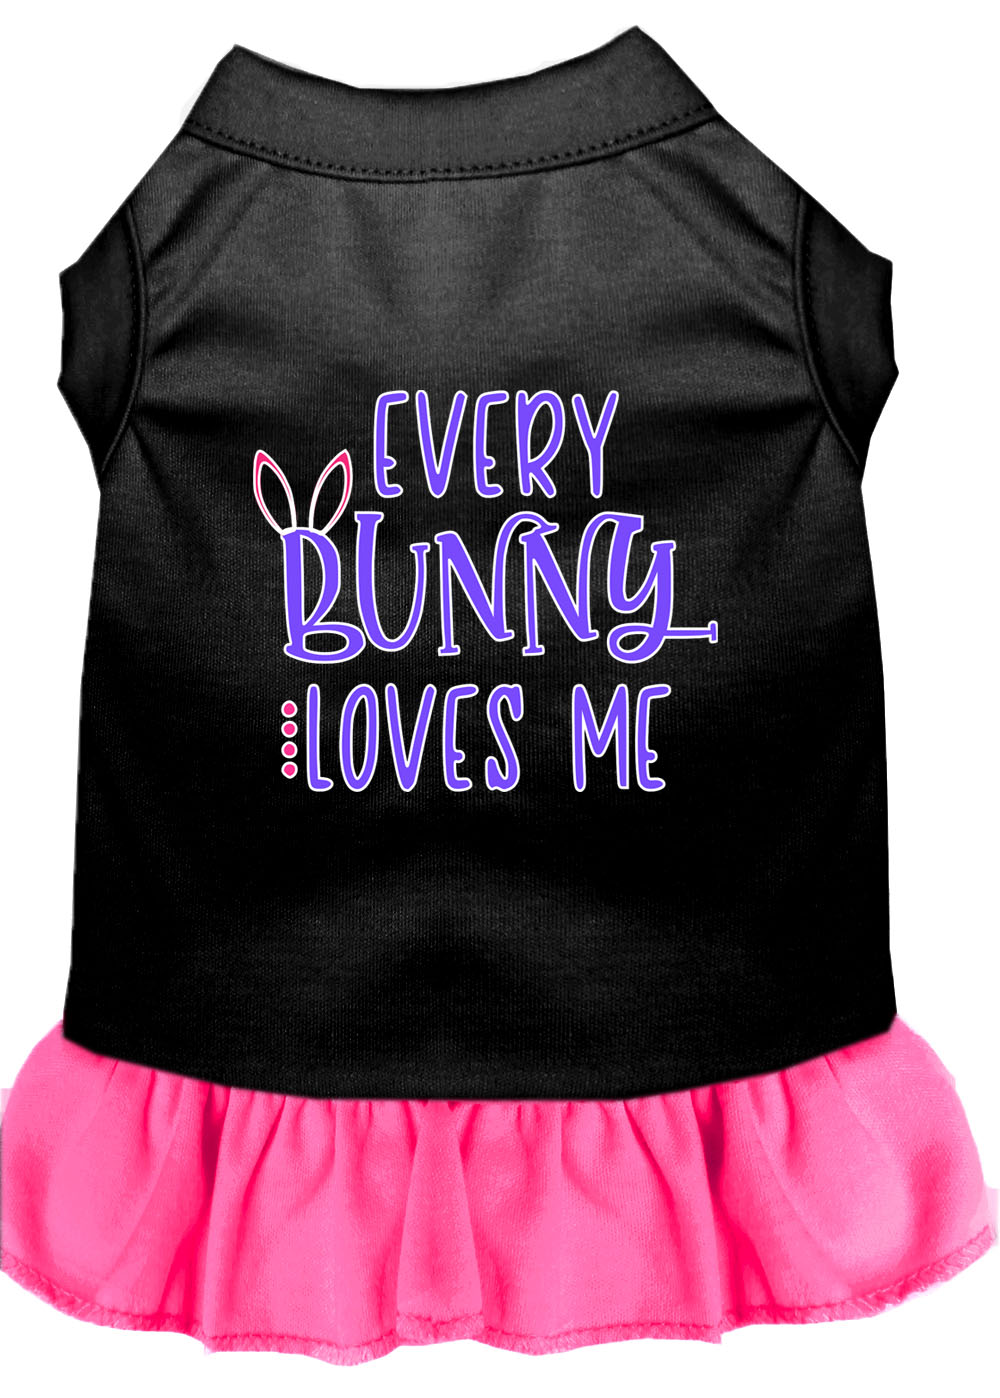 Every Bunny Loves me Screen Print Dog Dress Black with Bright Pink XS